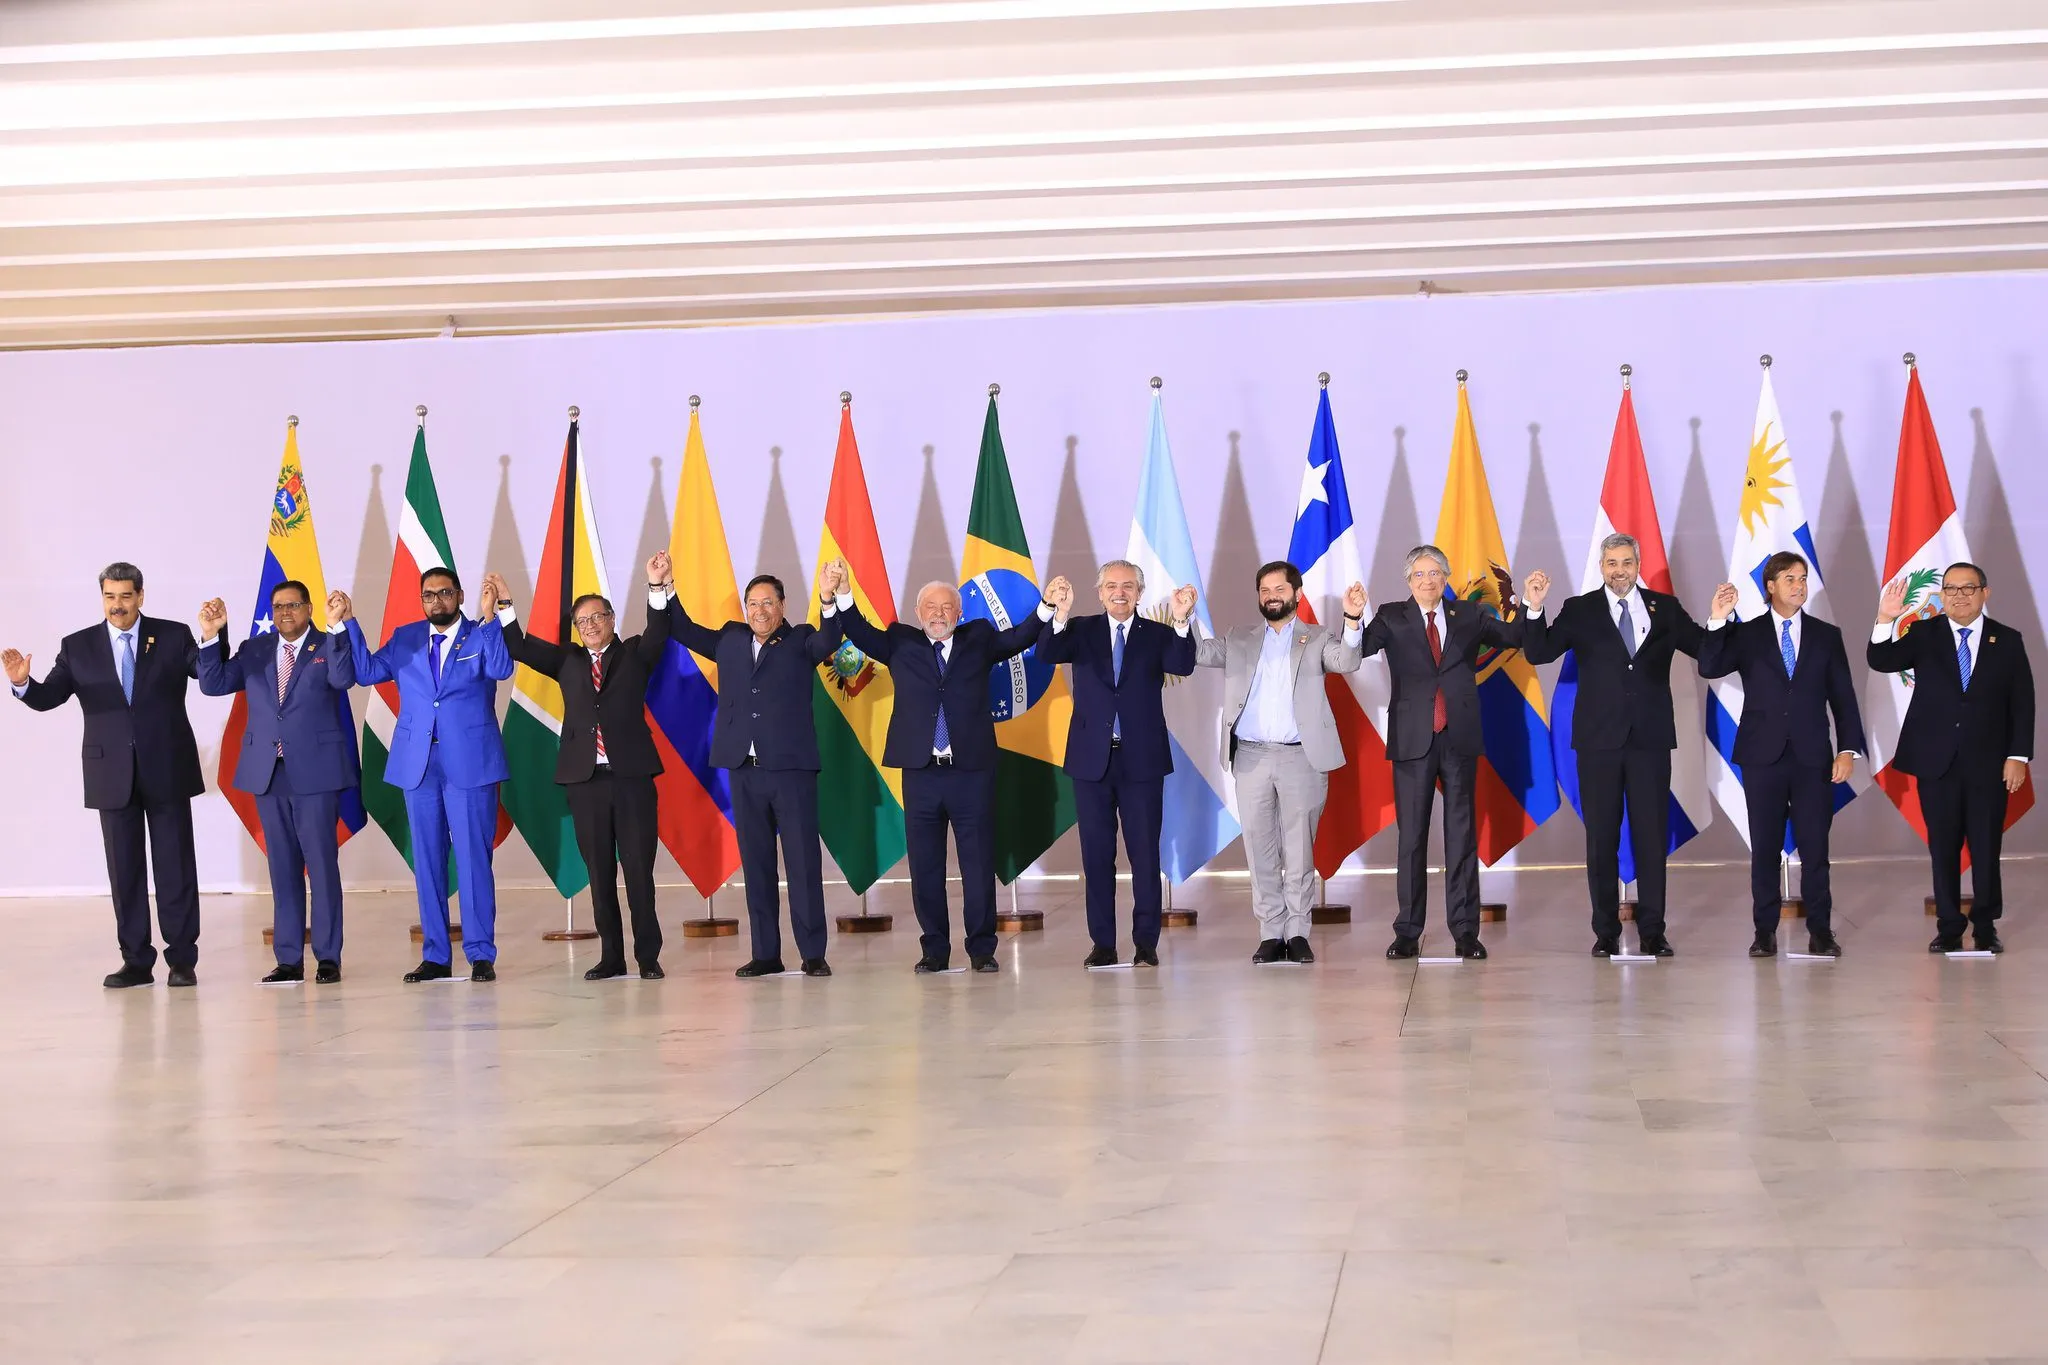 Family photo with all the heads of state in attendance at the South American Summit called by President Lula in Brasilia on Tuesday, May 30, 2023. Photo: Twitter/@teleSURtv.